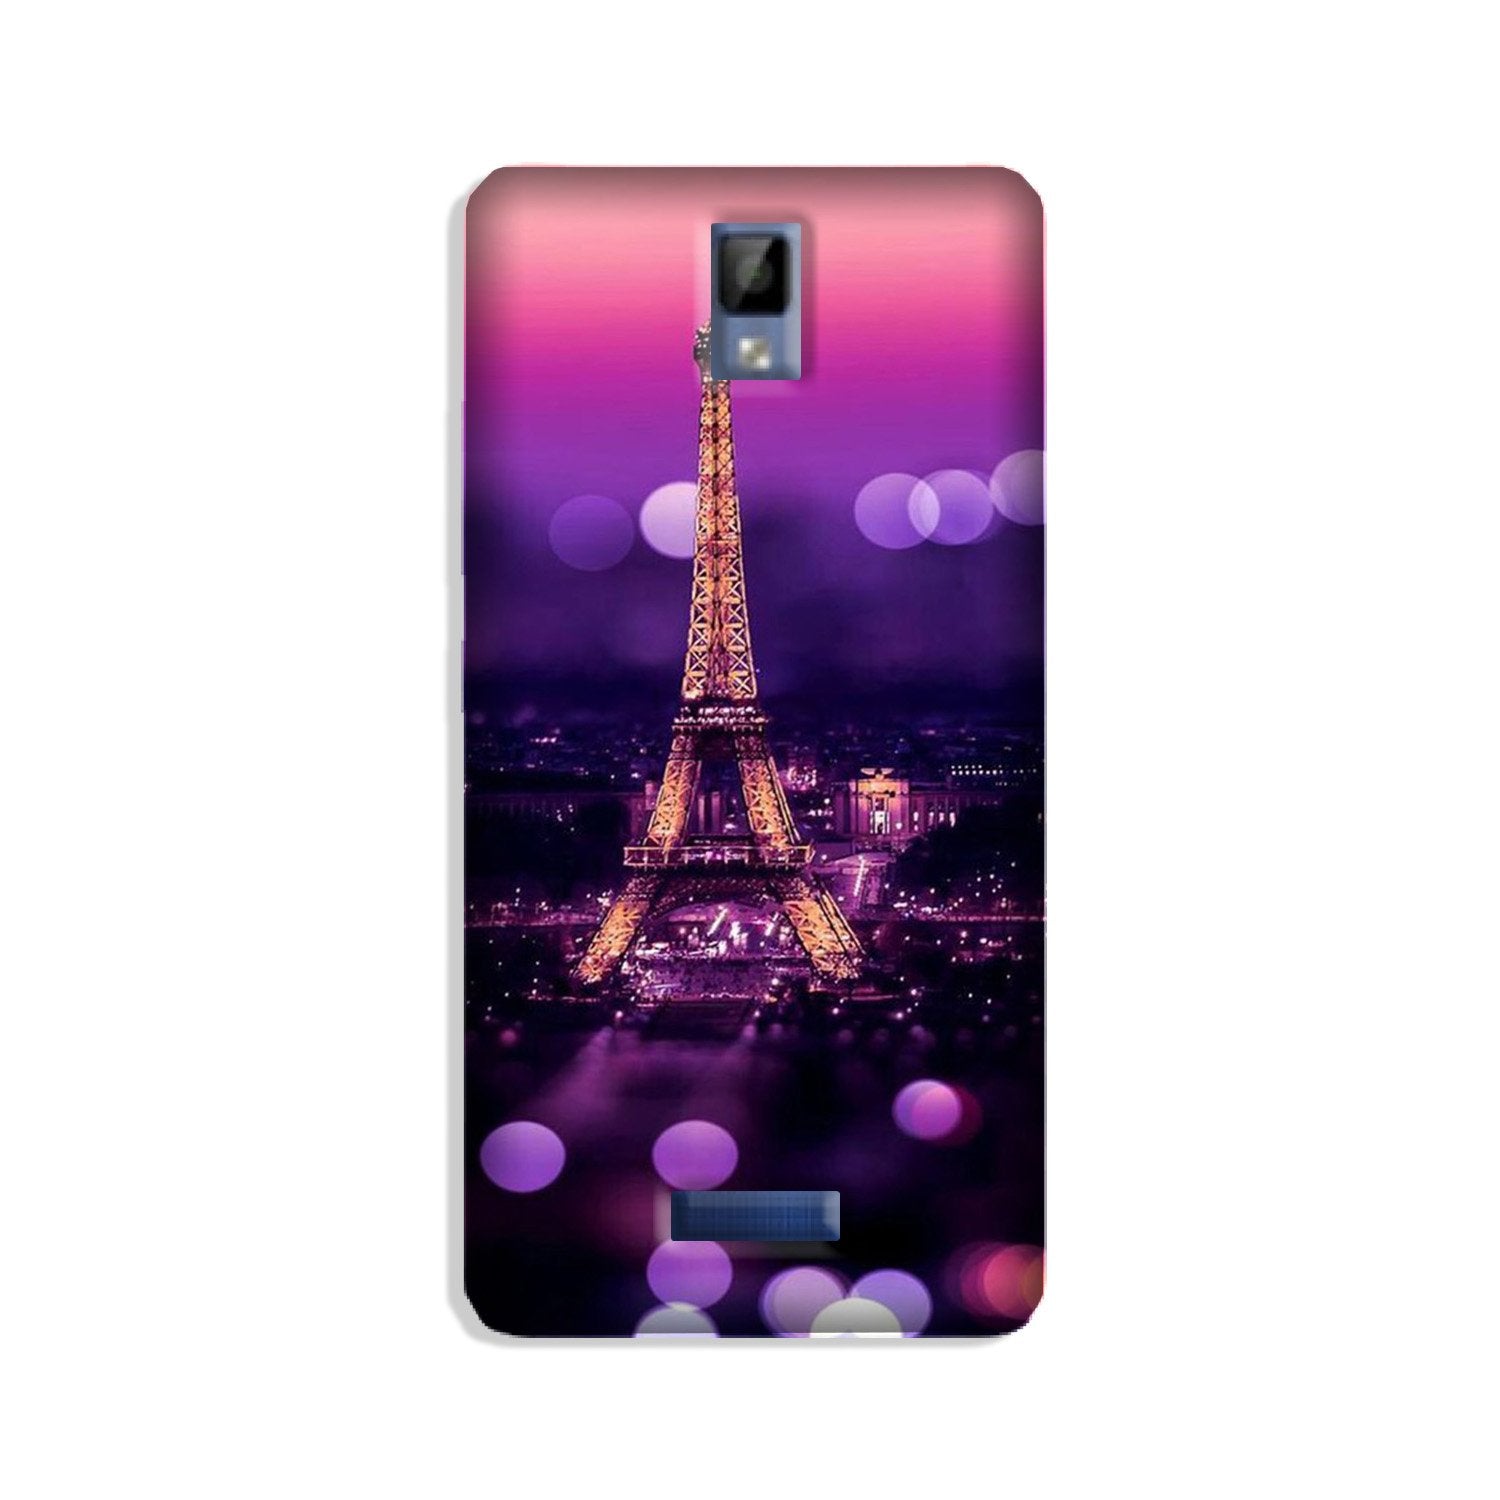 Eiffel Tower Case for Gionee P7